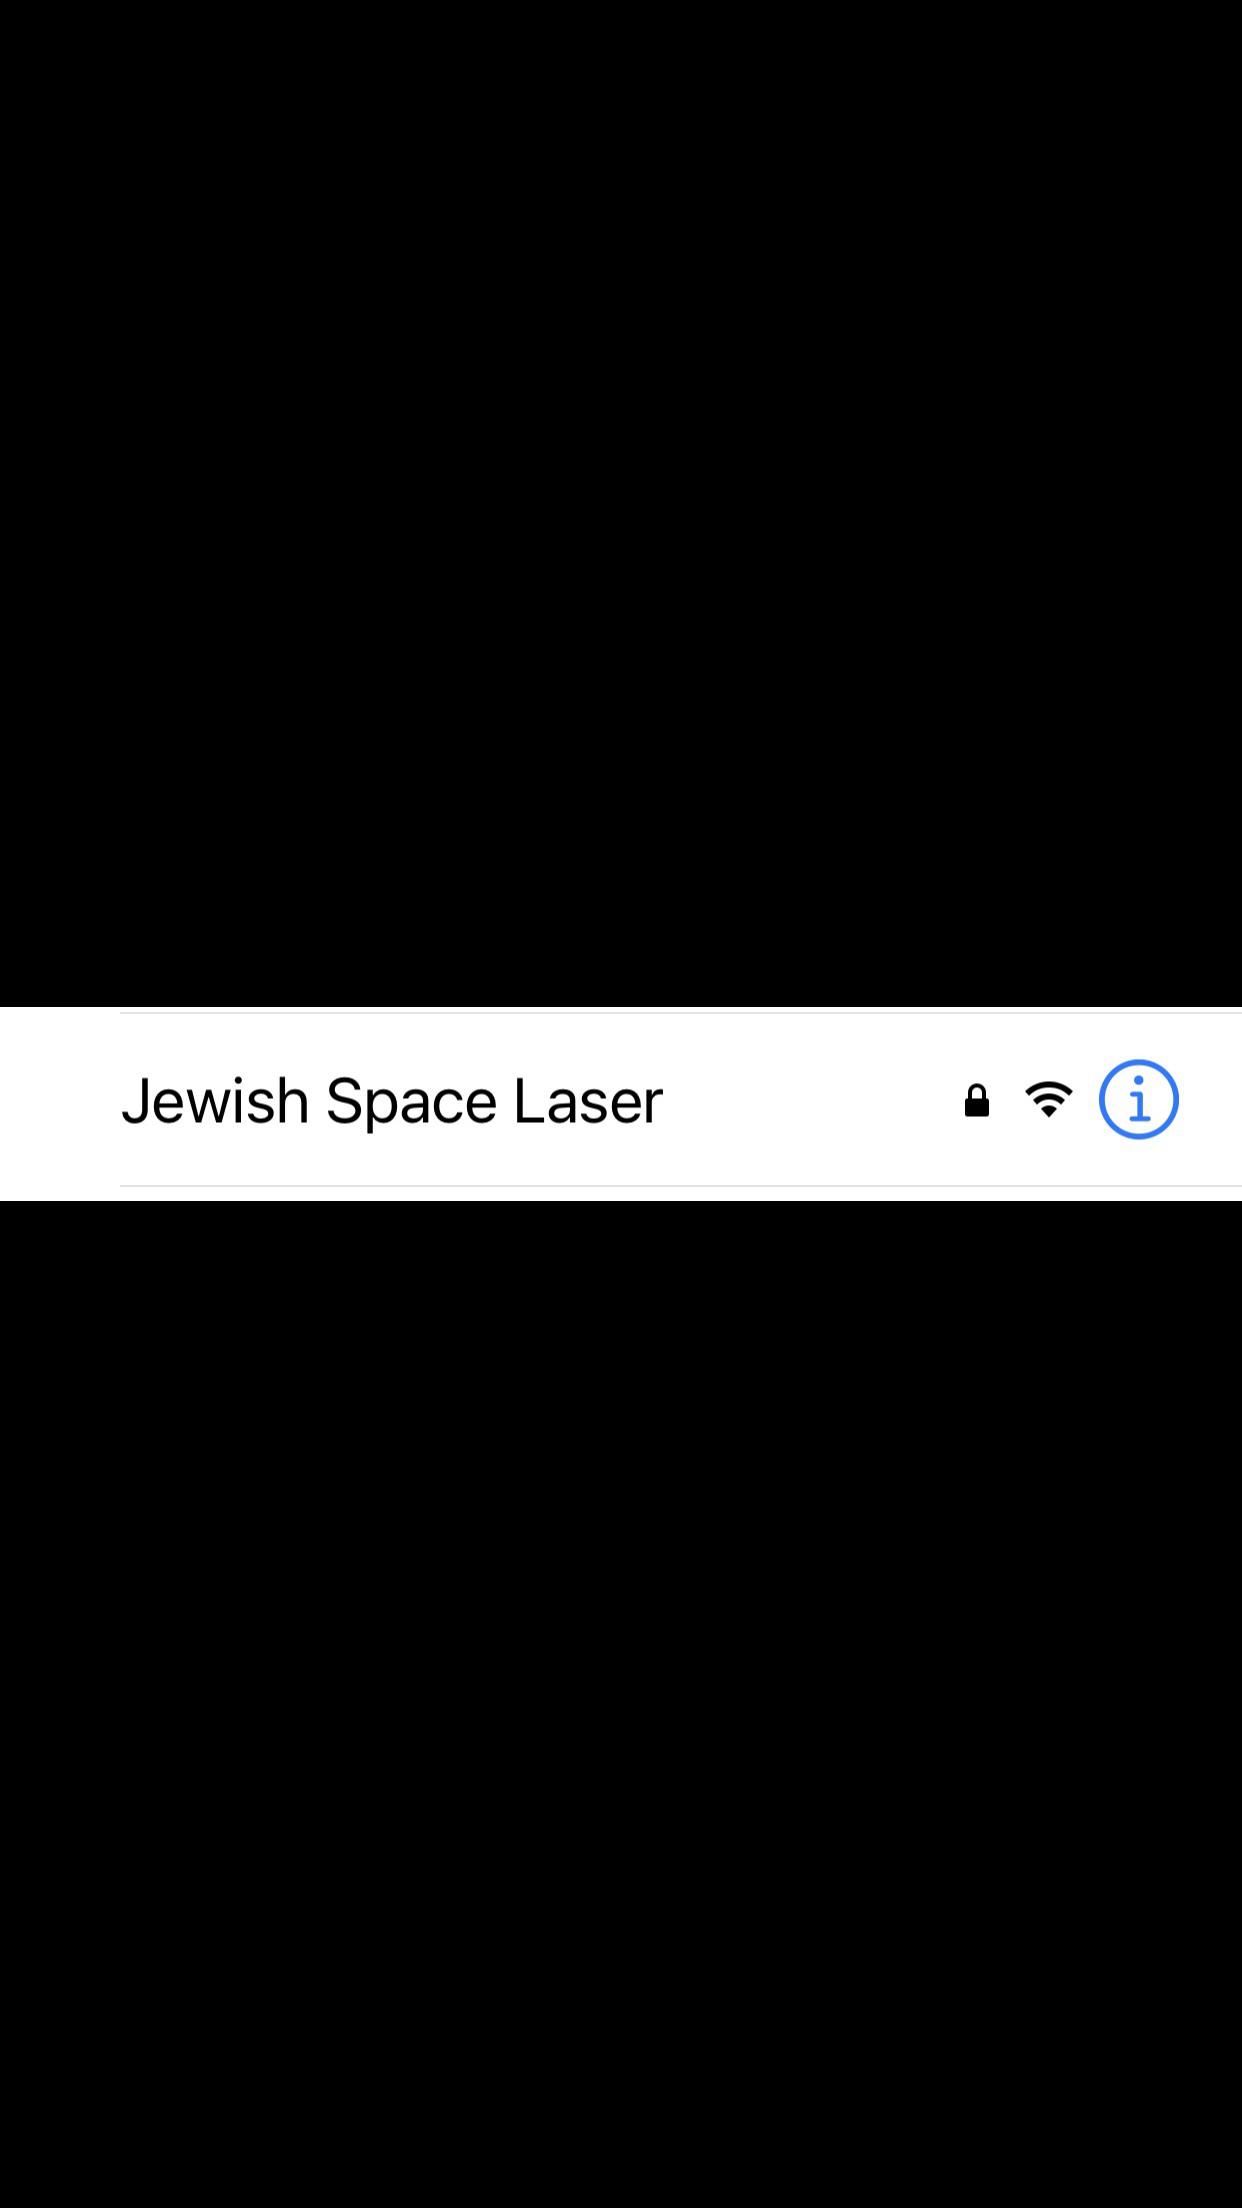 My Jewish neighbors changed the name of their WiFi network.